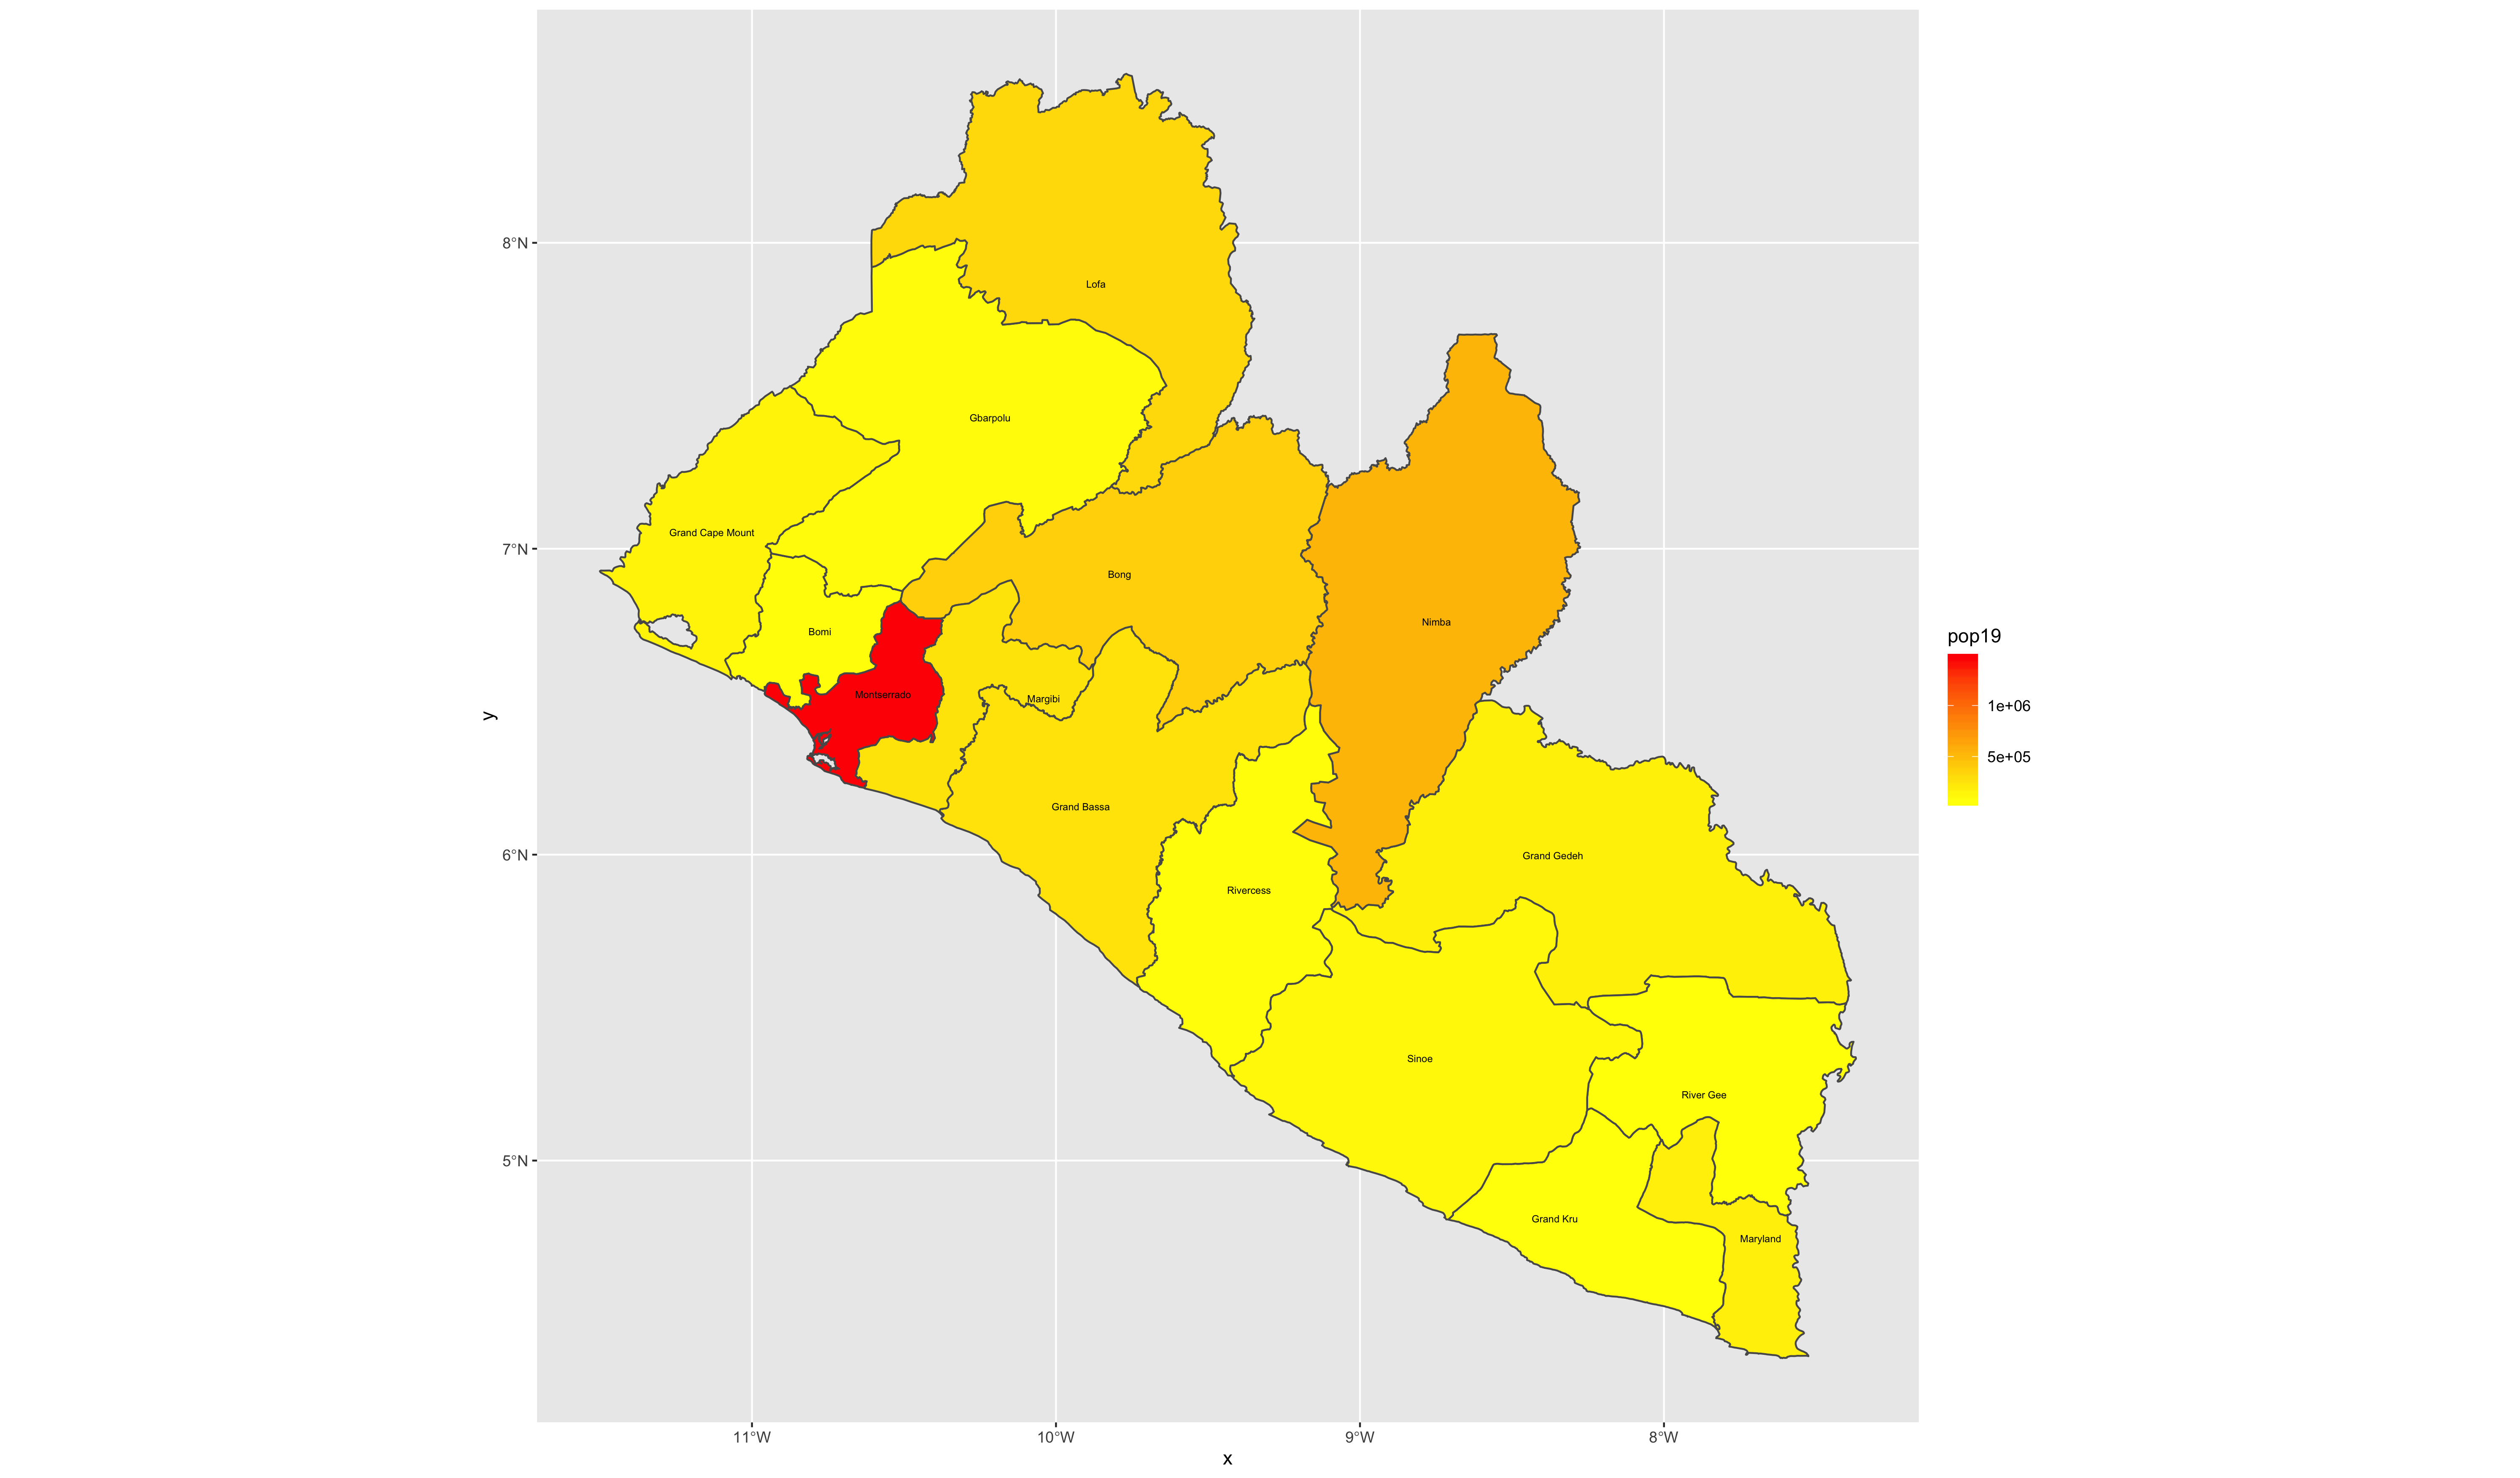 Population of Liberia's Counties in 2019